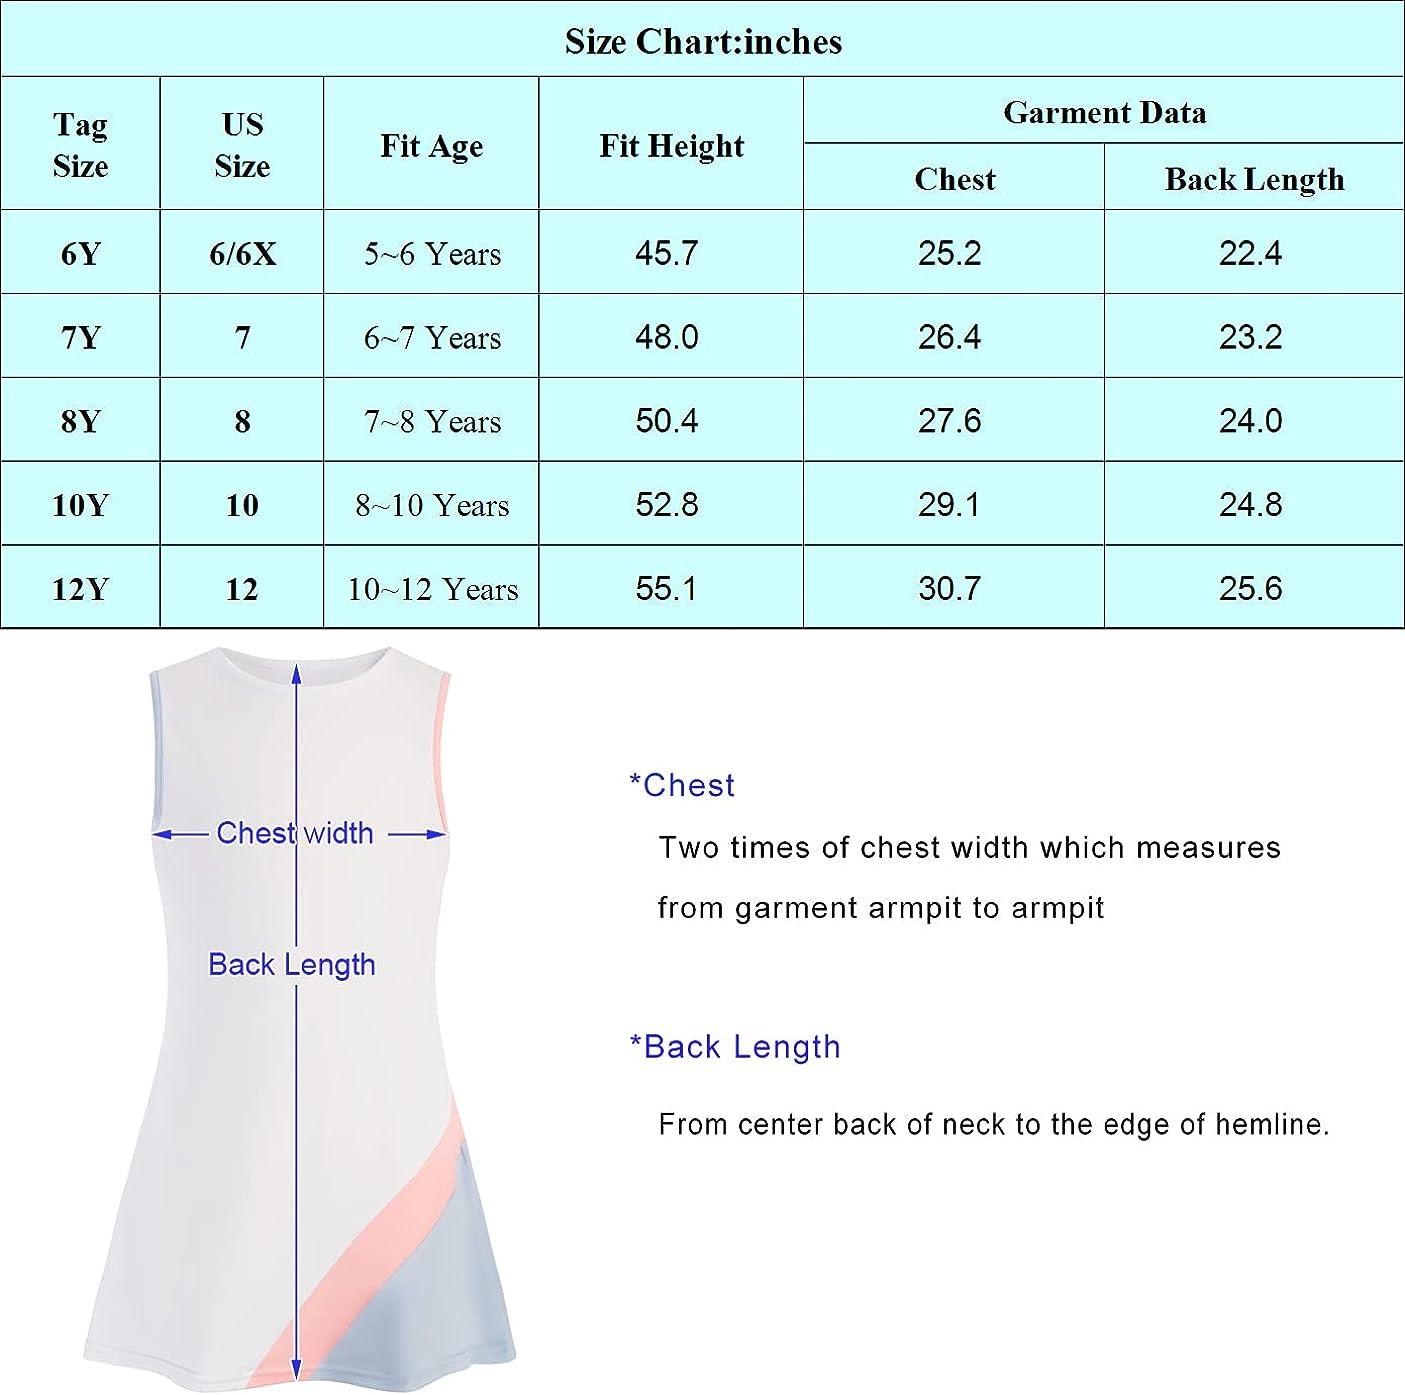 Youth Girls Tennis Dresses Golf Sleeveless Outfit School Sports Dress with  Shorts